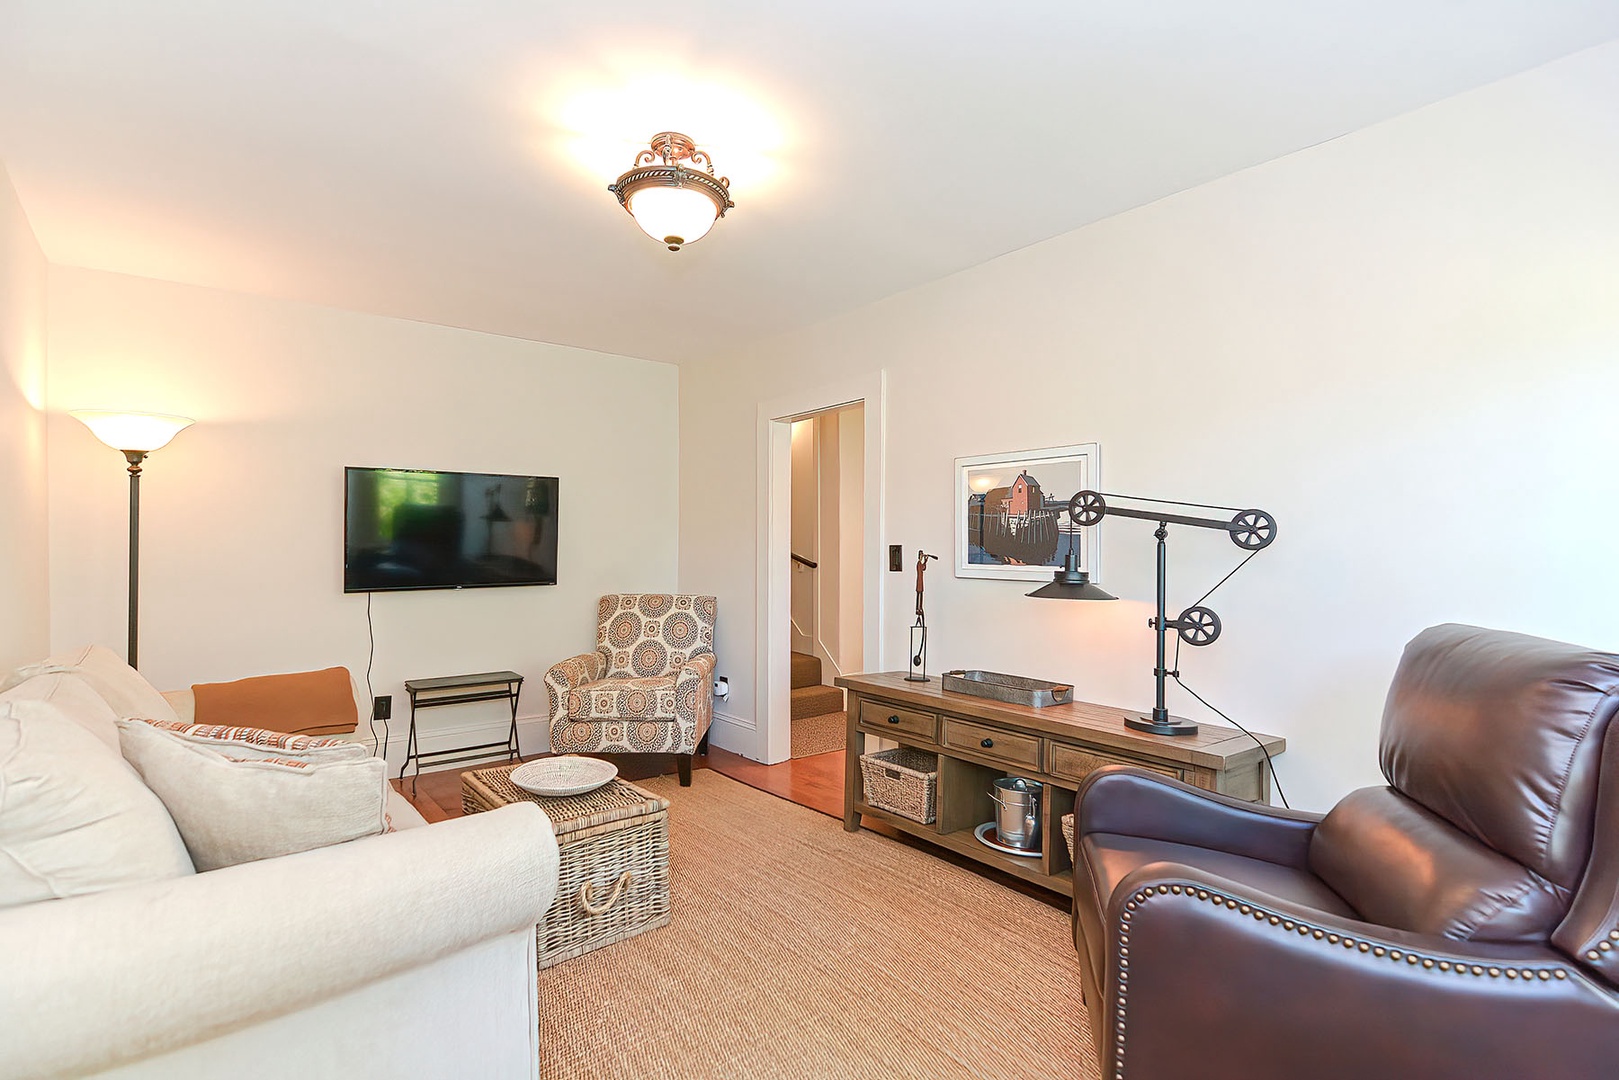 Watch tv or gather with family in this comfortable space.